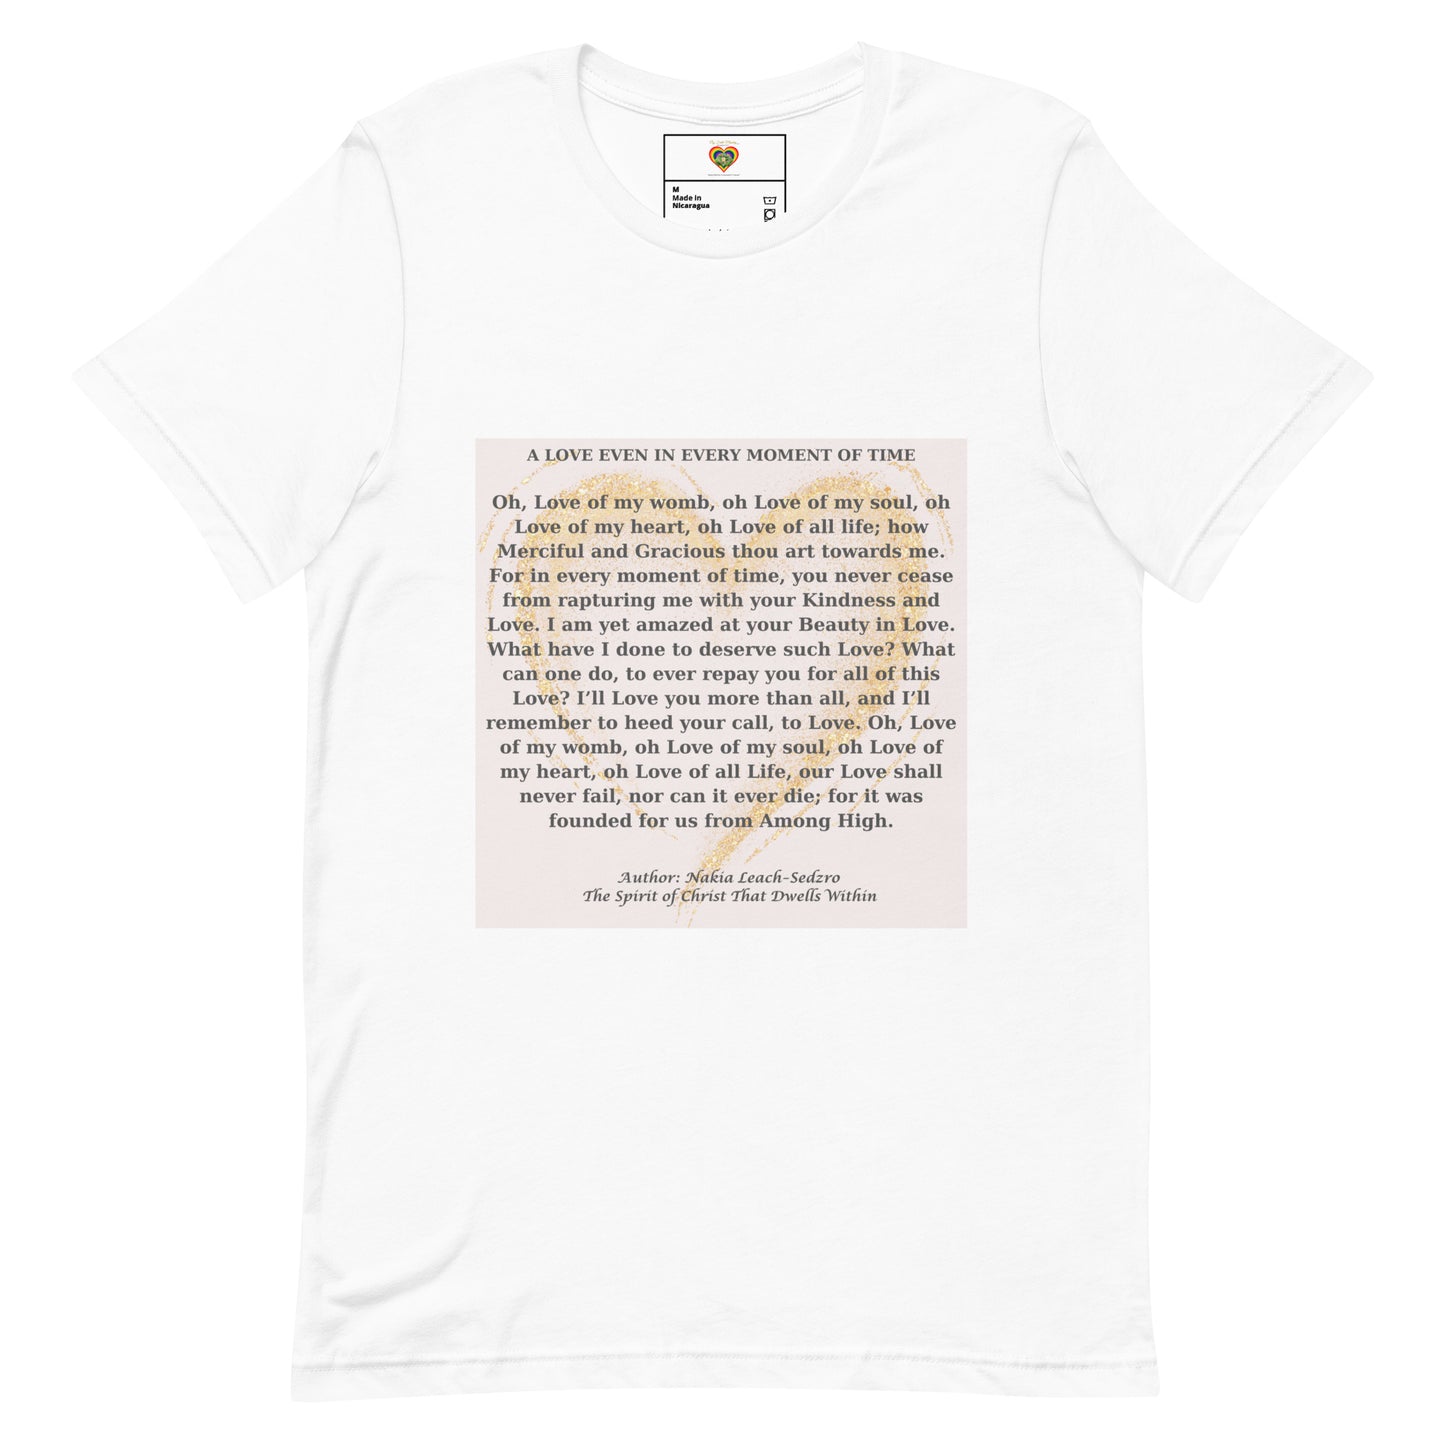 By Faith "A Love In Every Moment Of Time" Poem Unisex T-Shirt